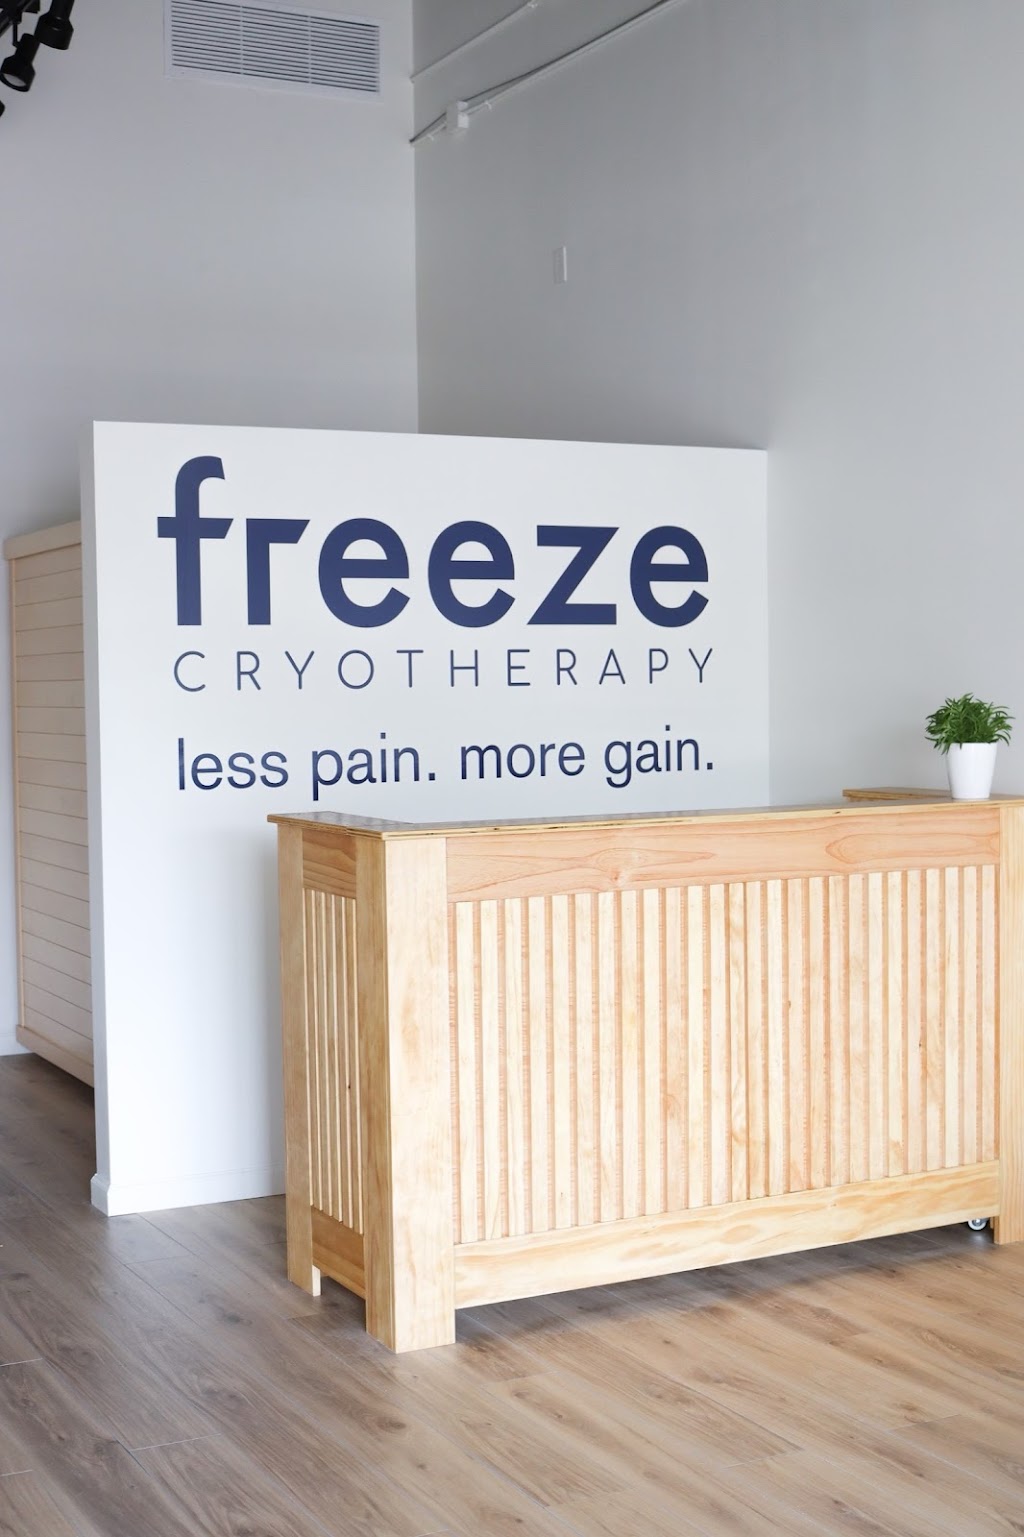 Freeze Cryotherapy | 1907 Abrams Rd, Dallas, TX 75214 | Phone: (469) 902-4455